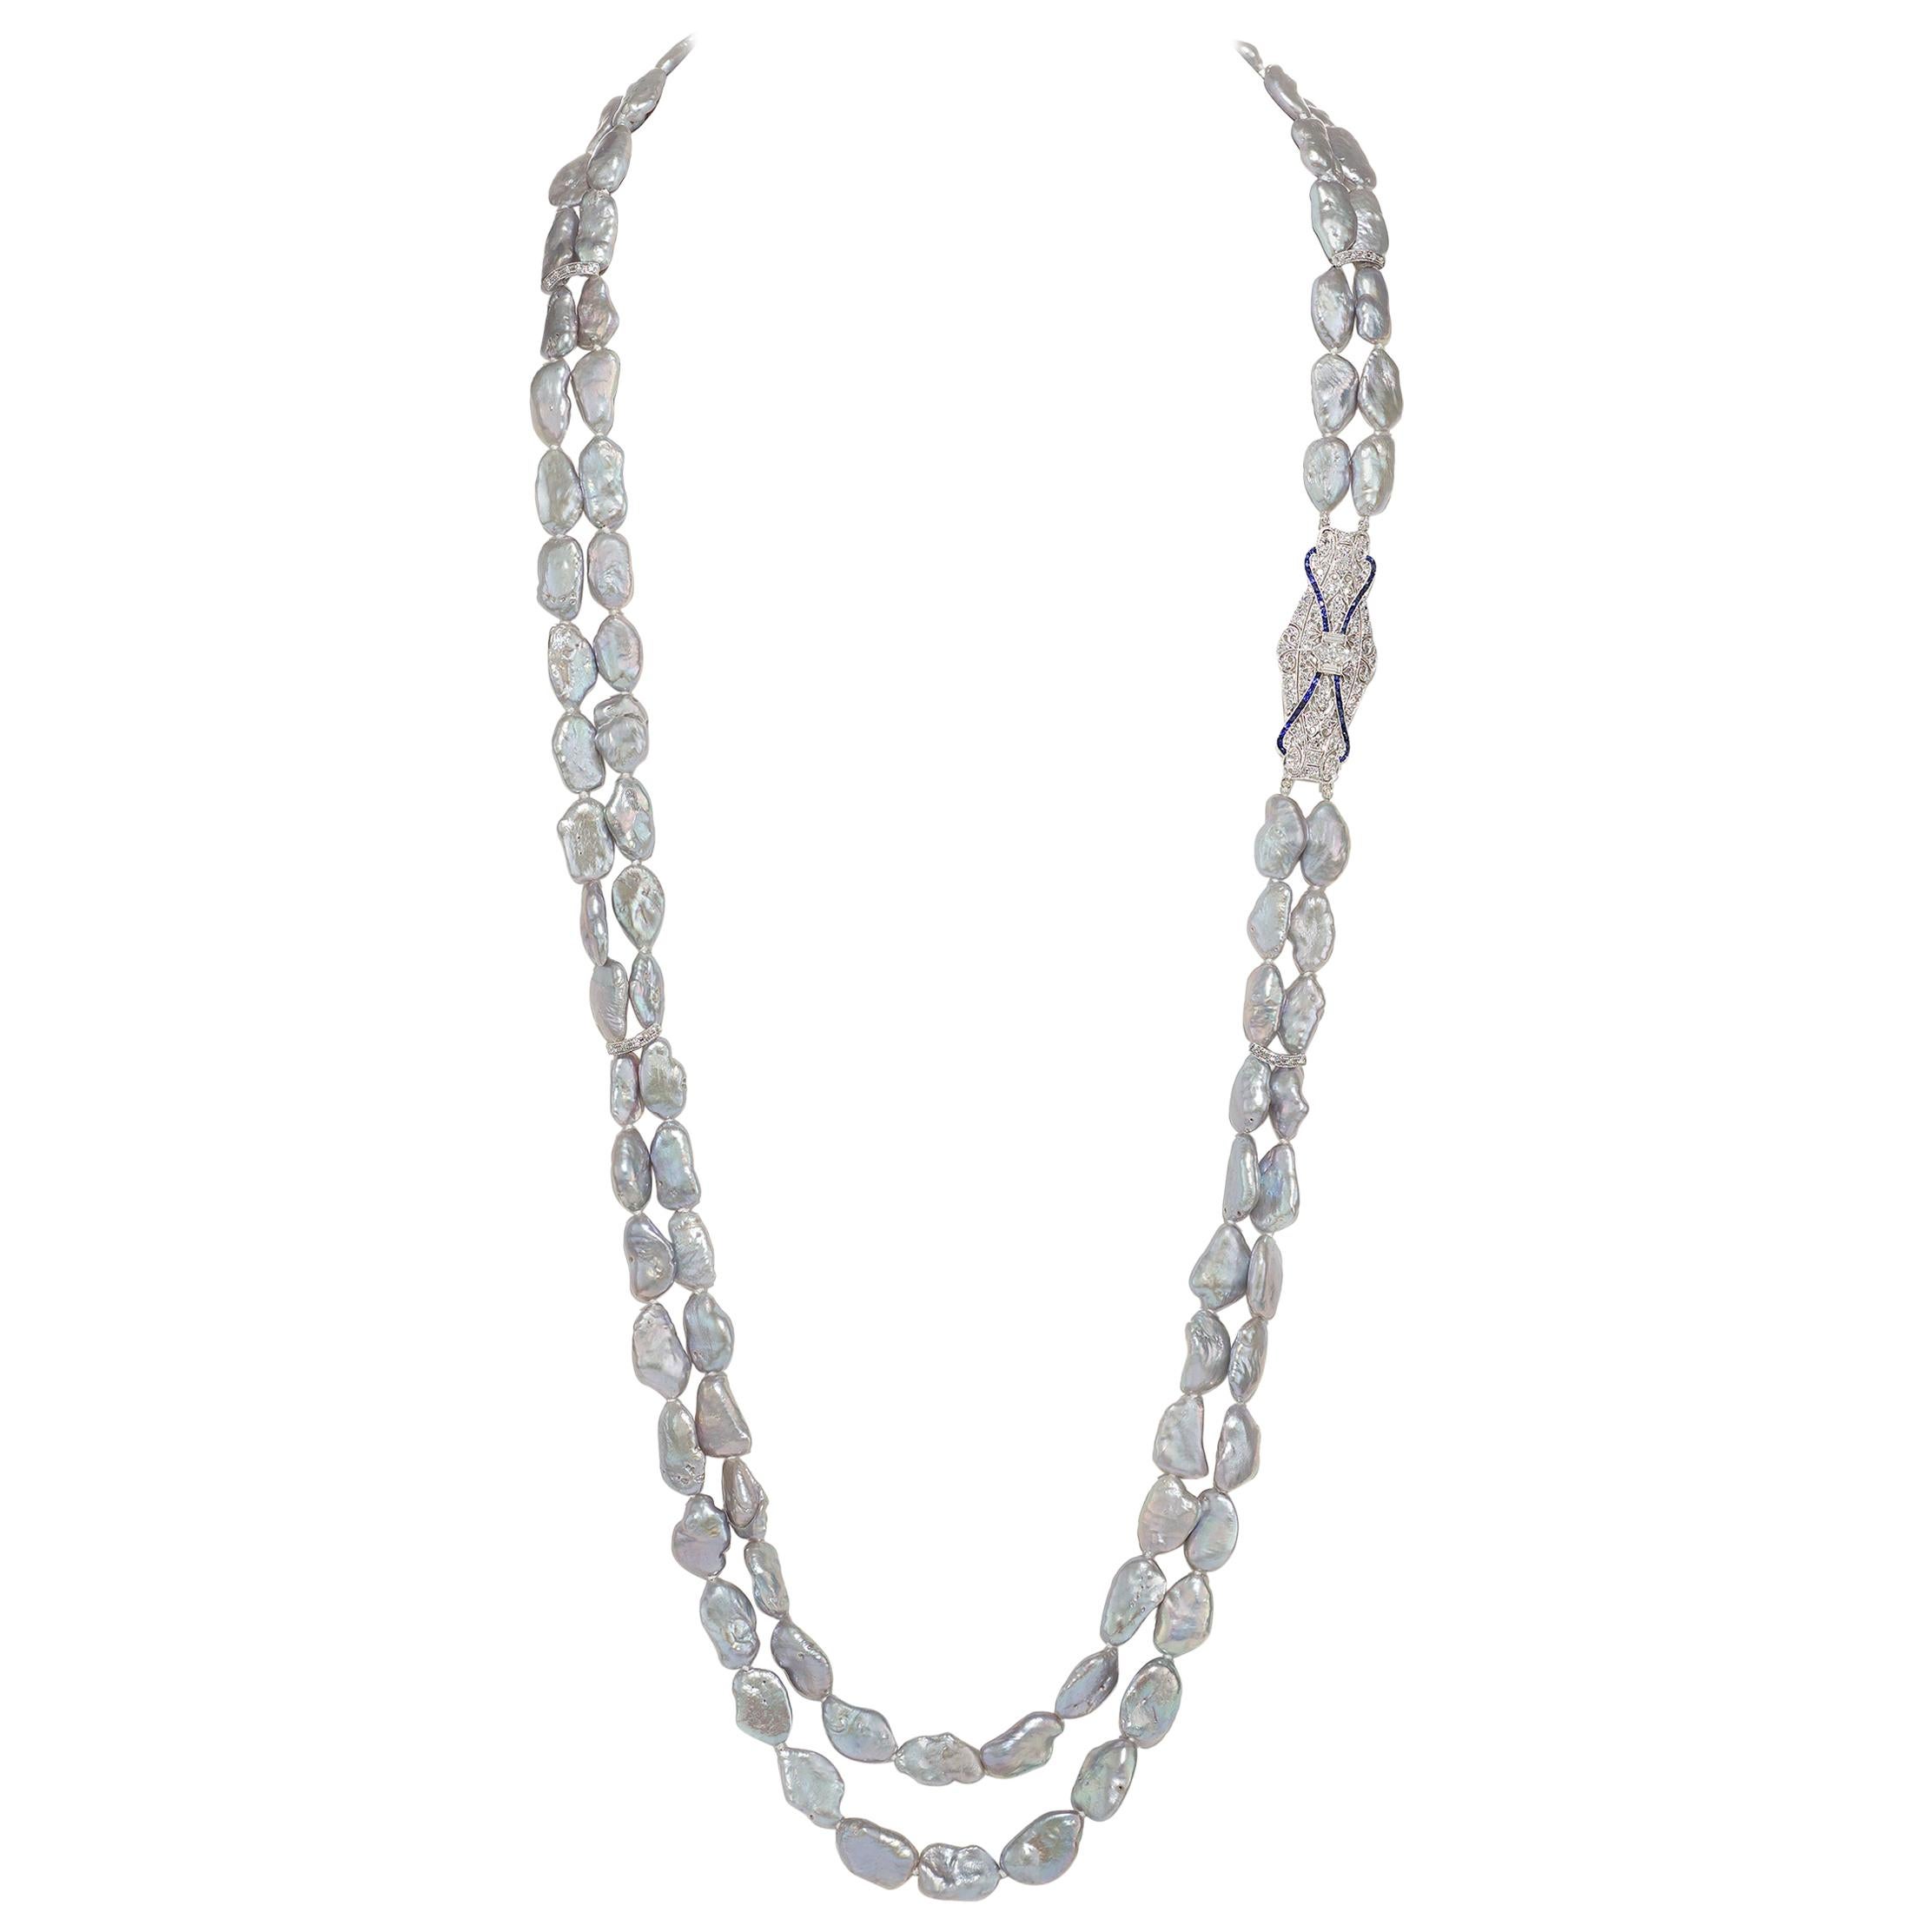 4.16 Carat French Cut Sapphire, Diamond, and Freshwater Pearl Necklace Platinum